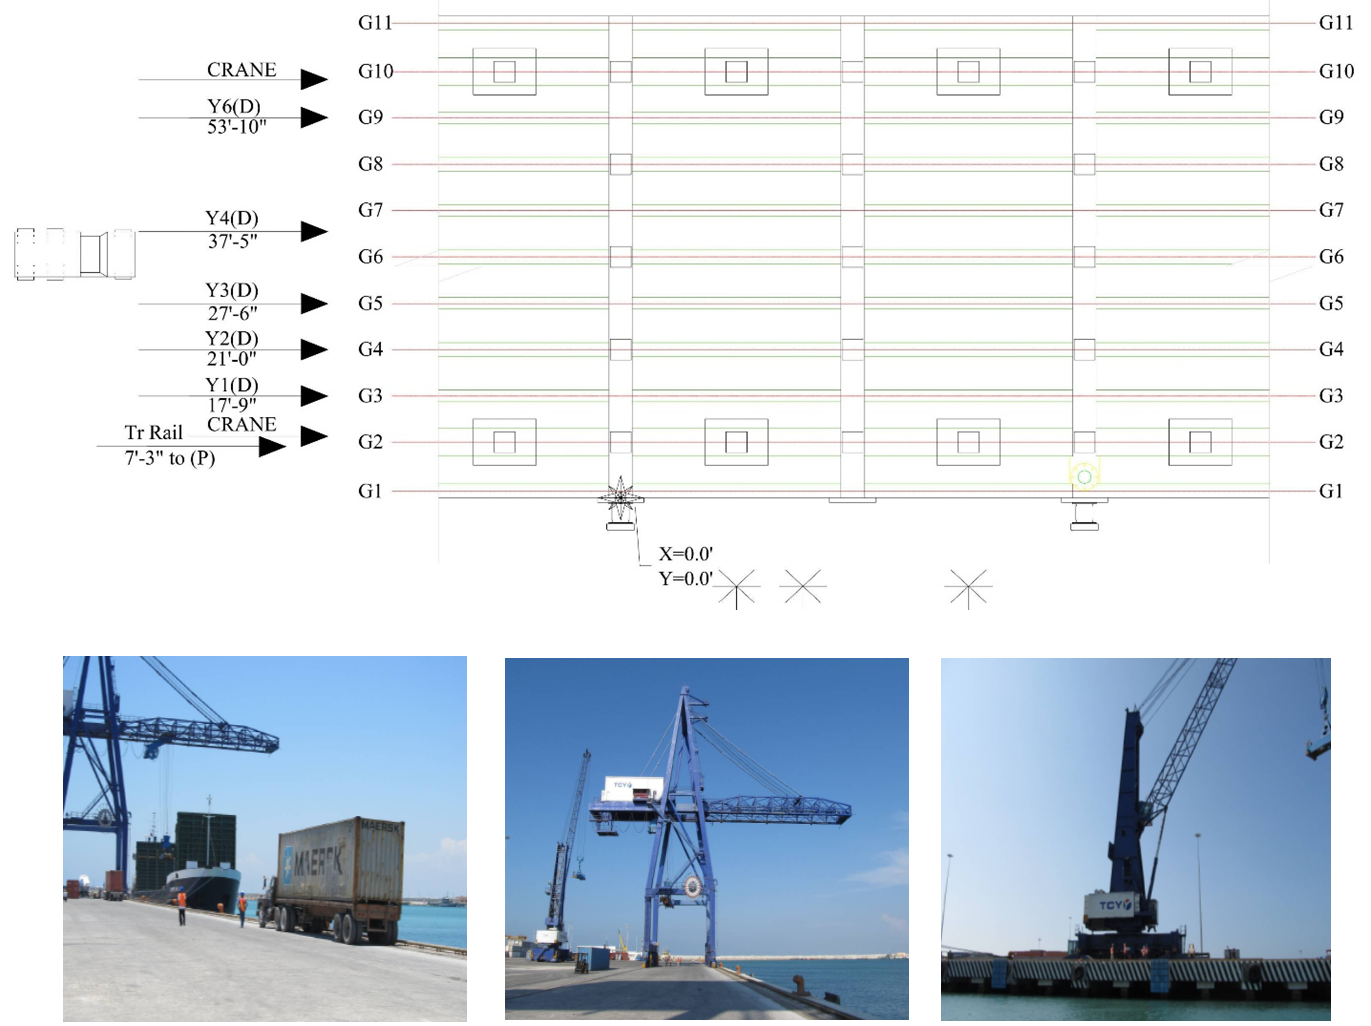 General truckload position plan and load types applied during testing (from
left to right, truck, gantry and Gottwald cranes).